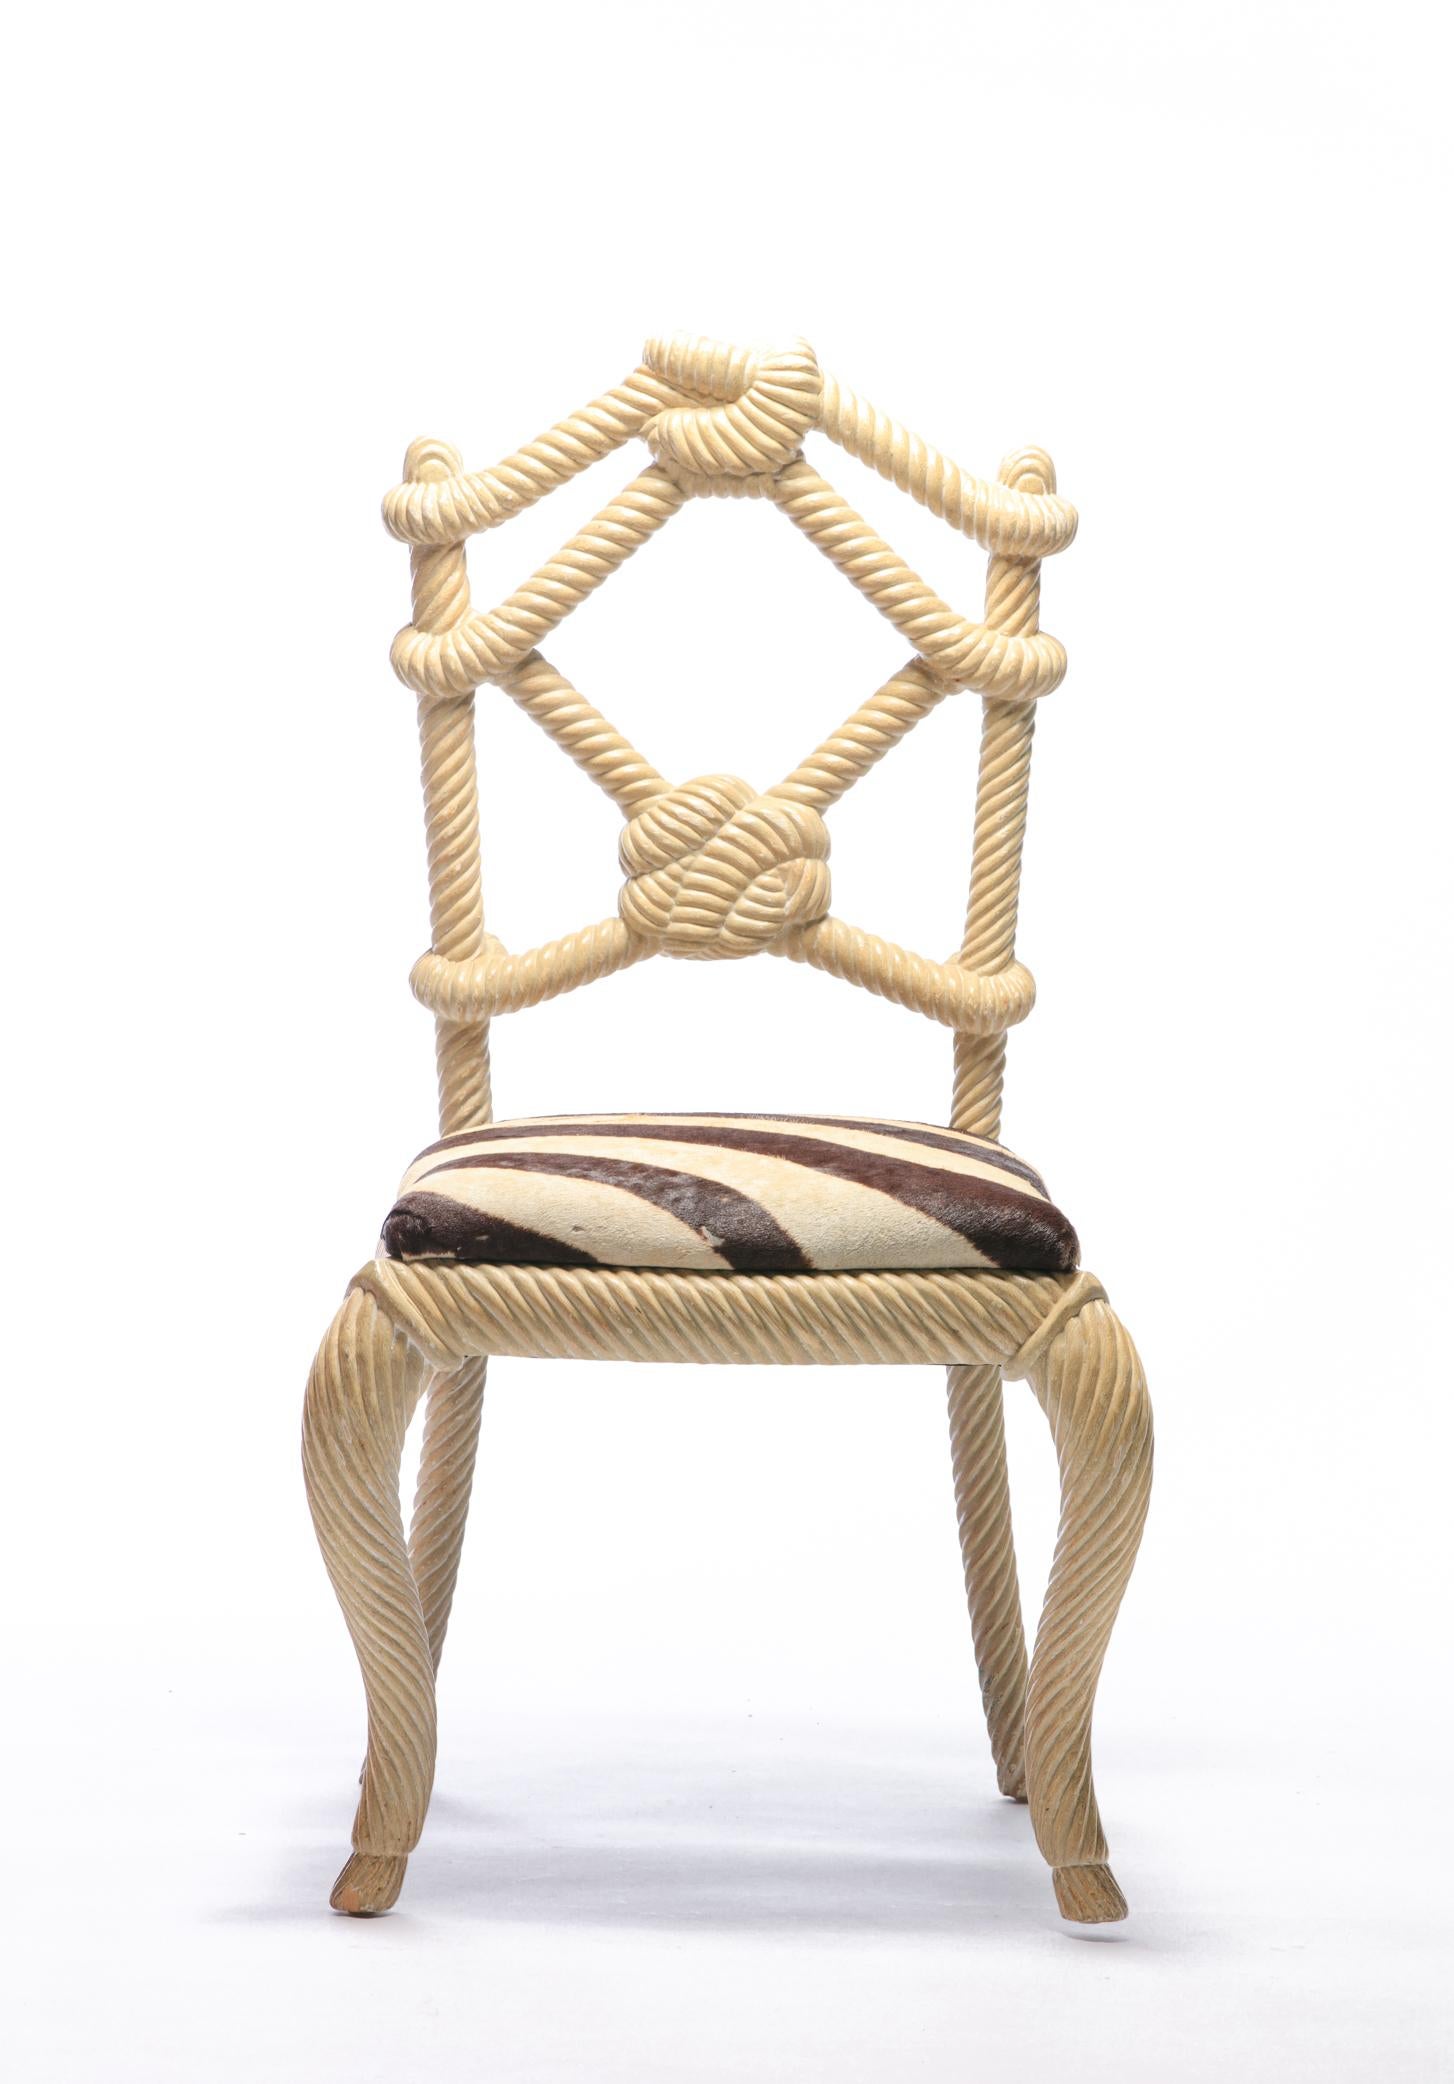 American Pair of Rope Chairs from Viceroy Miami with Zebra Hide Upholstered Seats For Sale